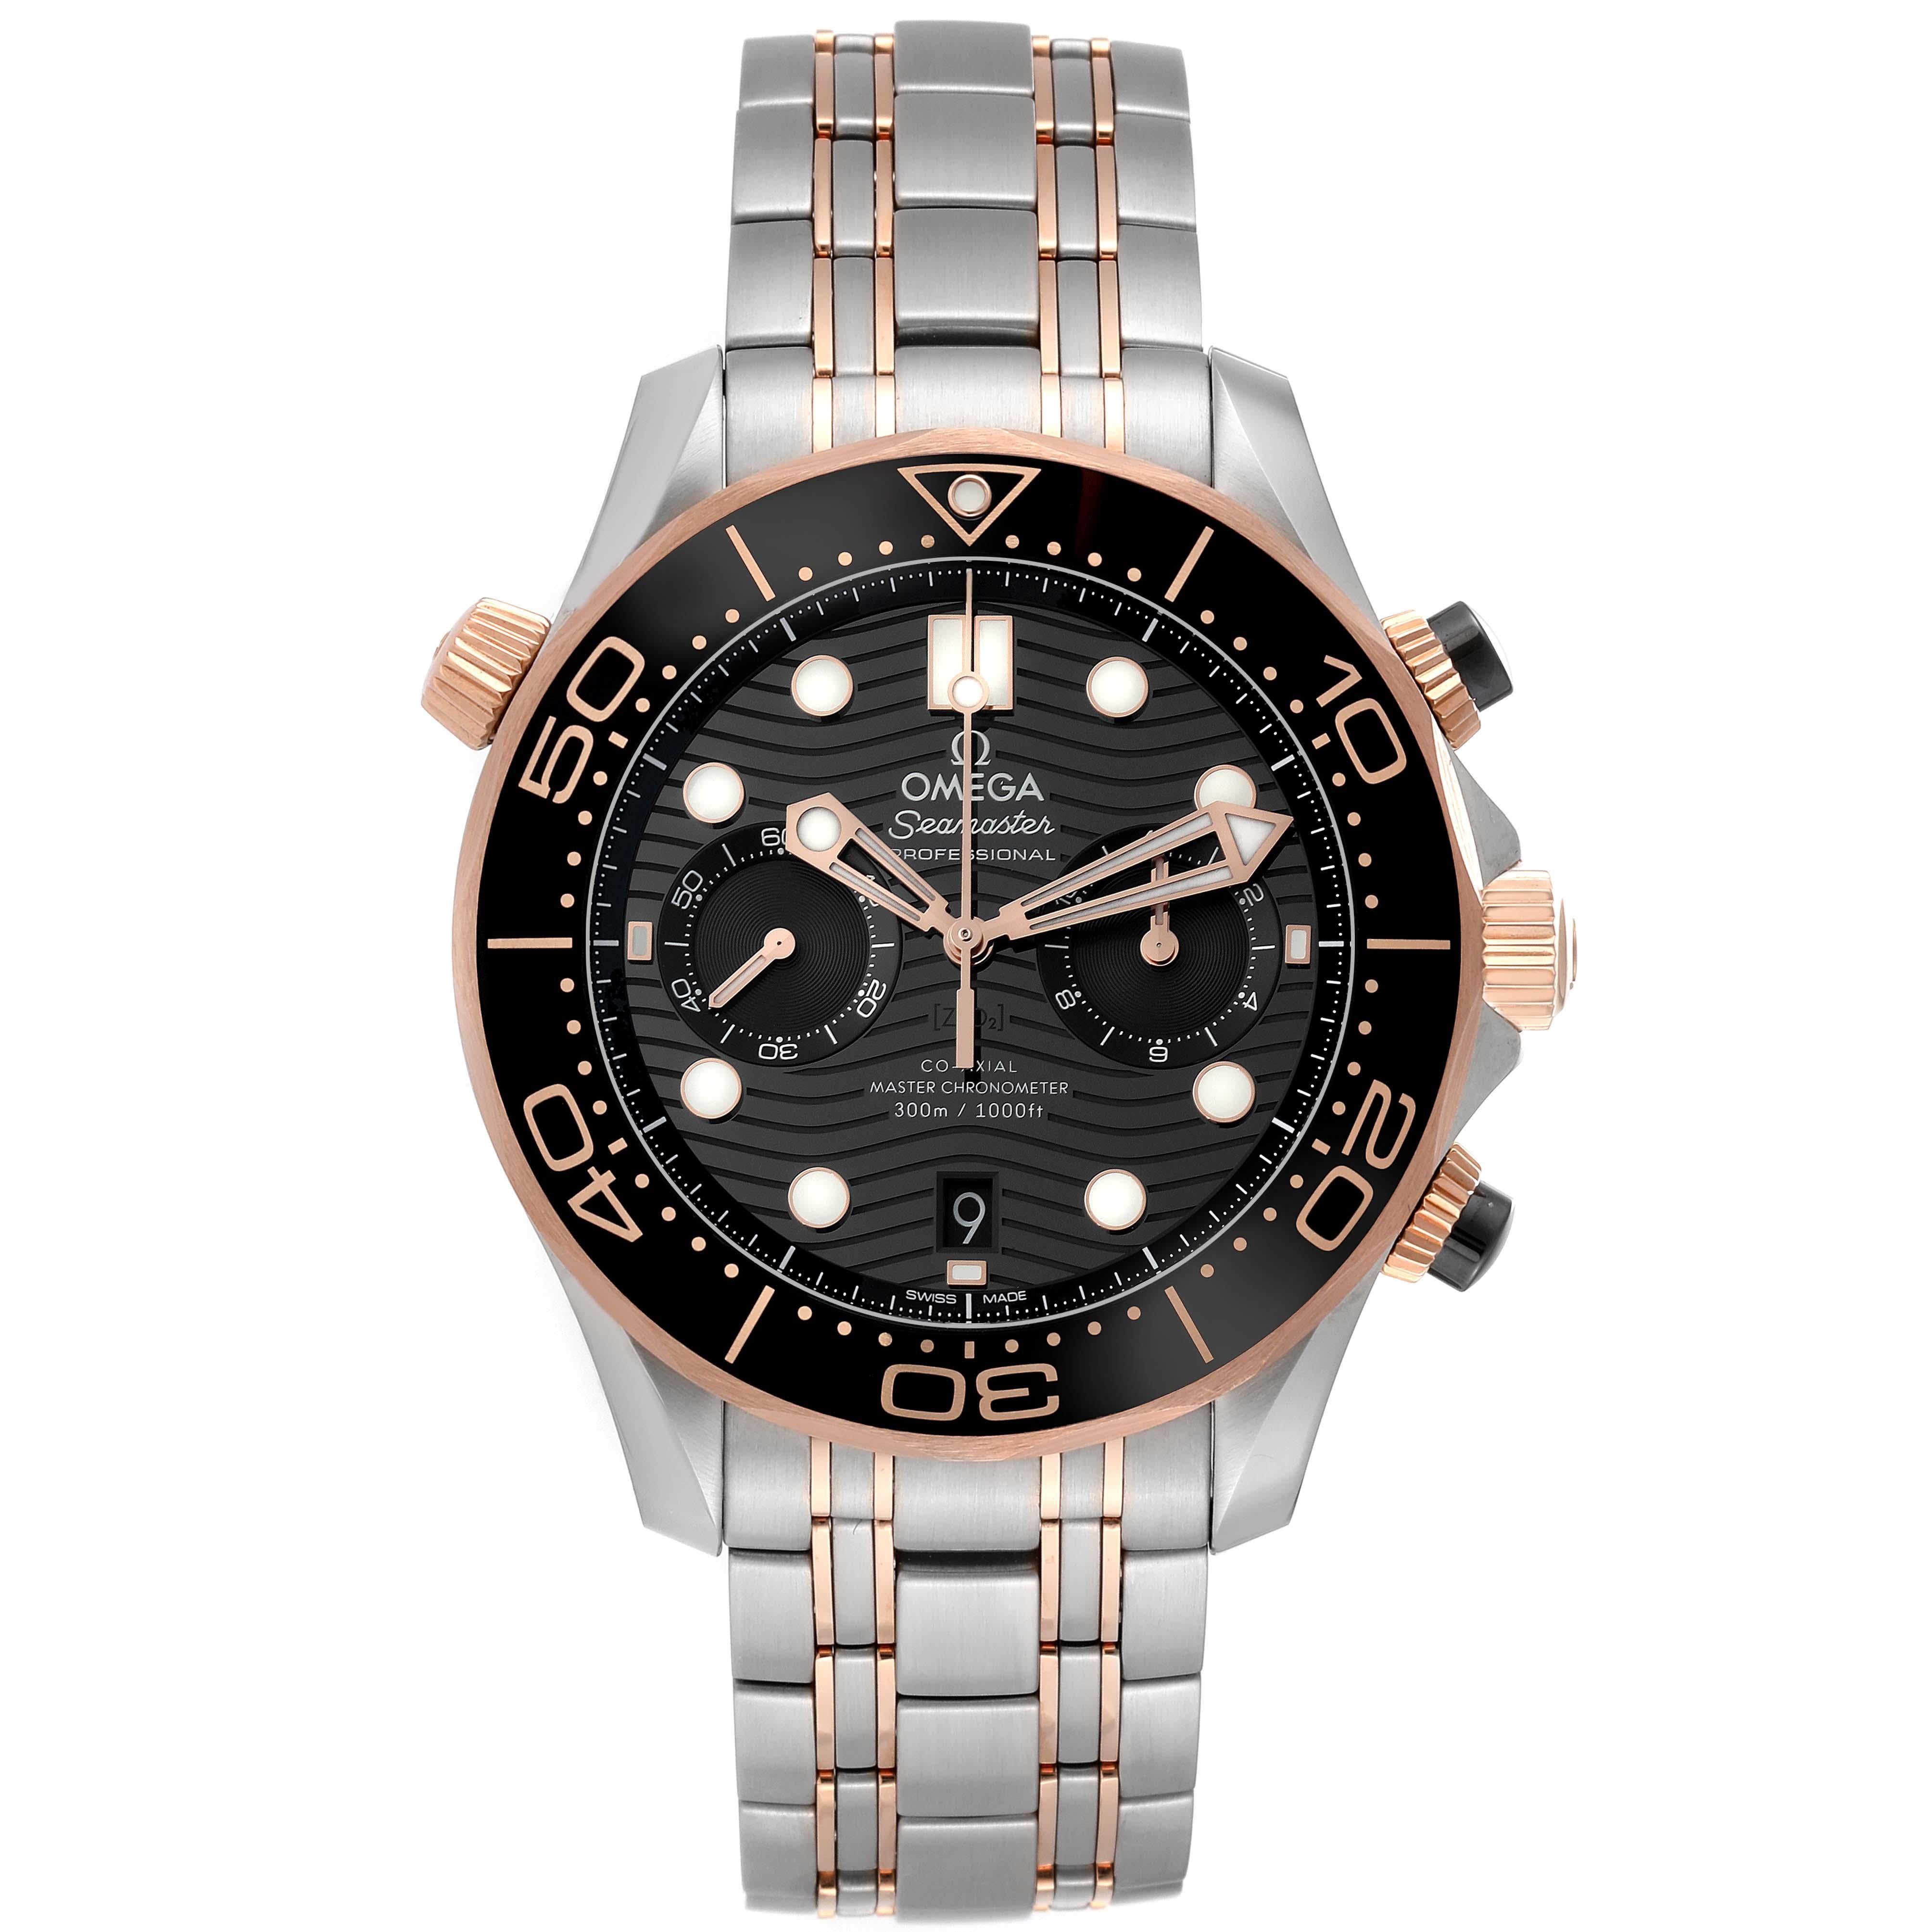 Omega Seamaster Diver Steel Rose Gold Mens Watch 210.20.44.51.01.001 Box Card. Automatic self-winding chronograph movement with column wheel and Co-Axial escapement. Certified Master Chronometer, approved by METAS, resistant to magnetic fields